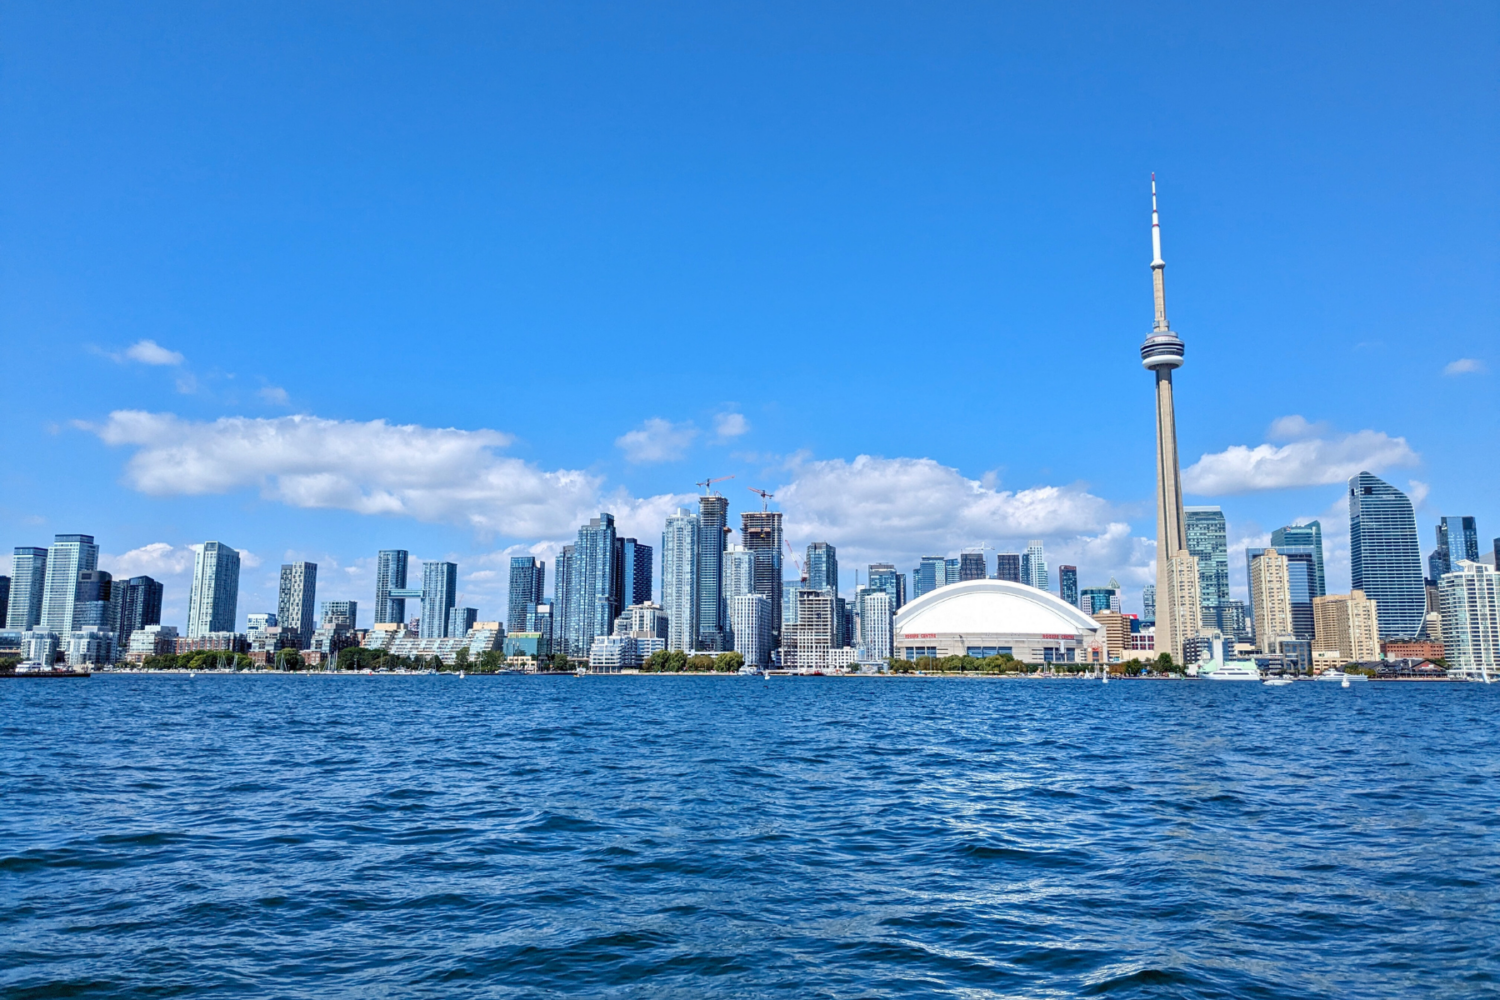 Toronto Canada skyline--photo by Chasing Chanelle. Best places for spring break for families.